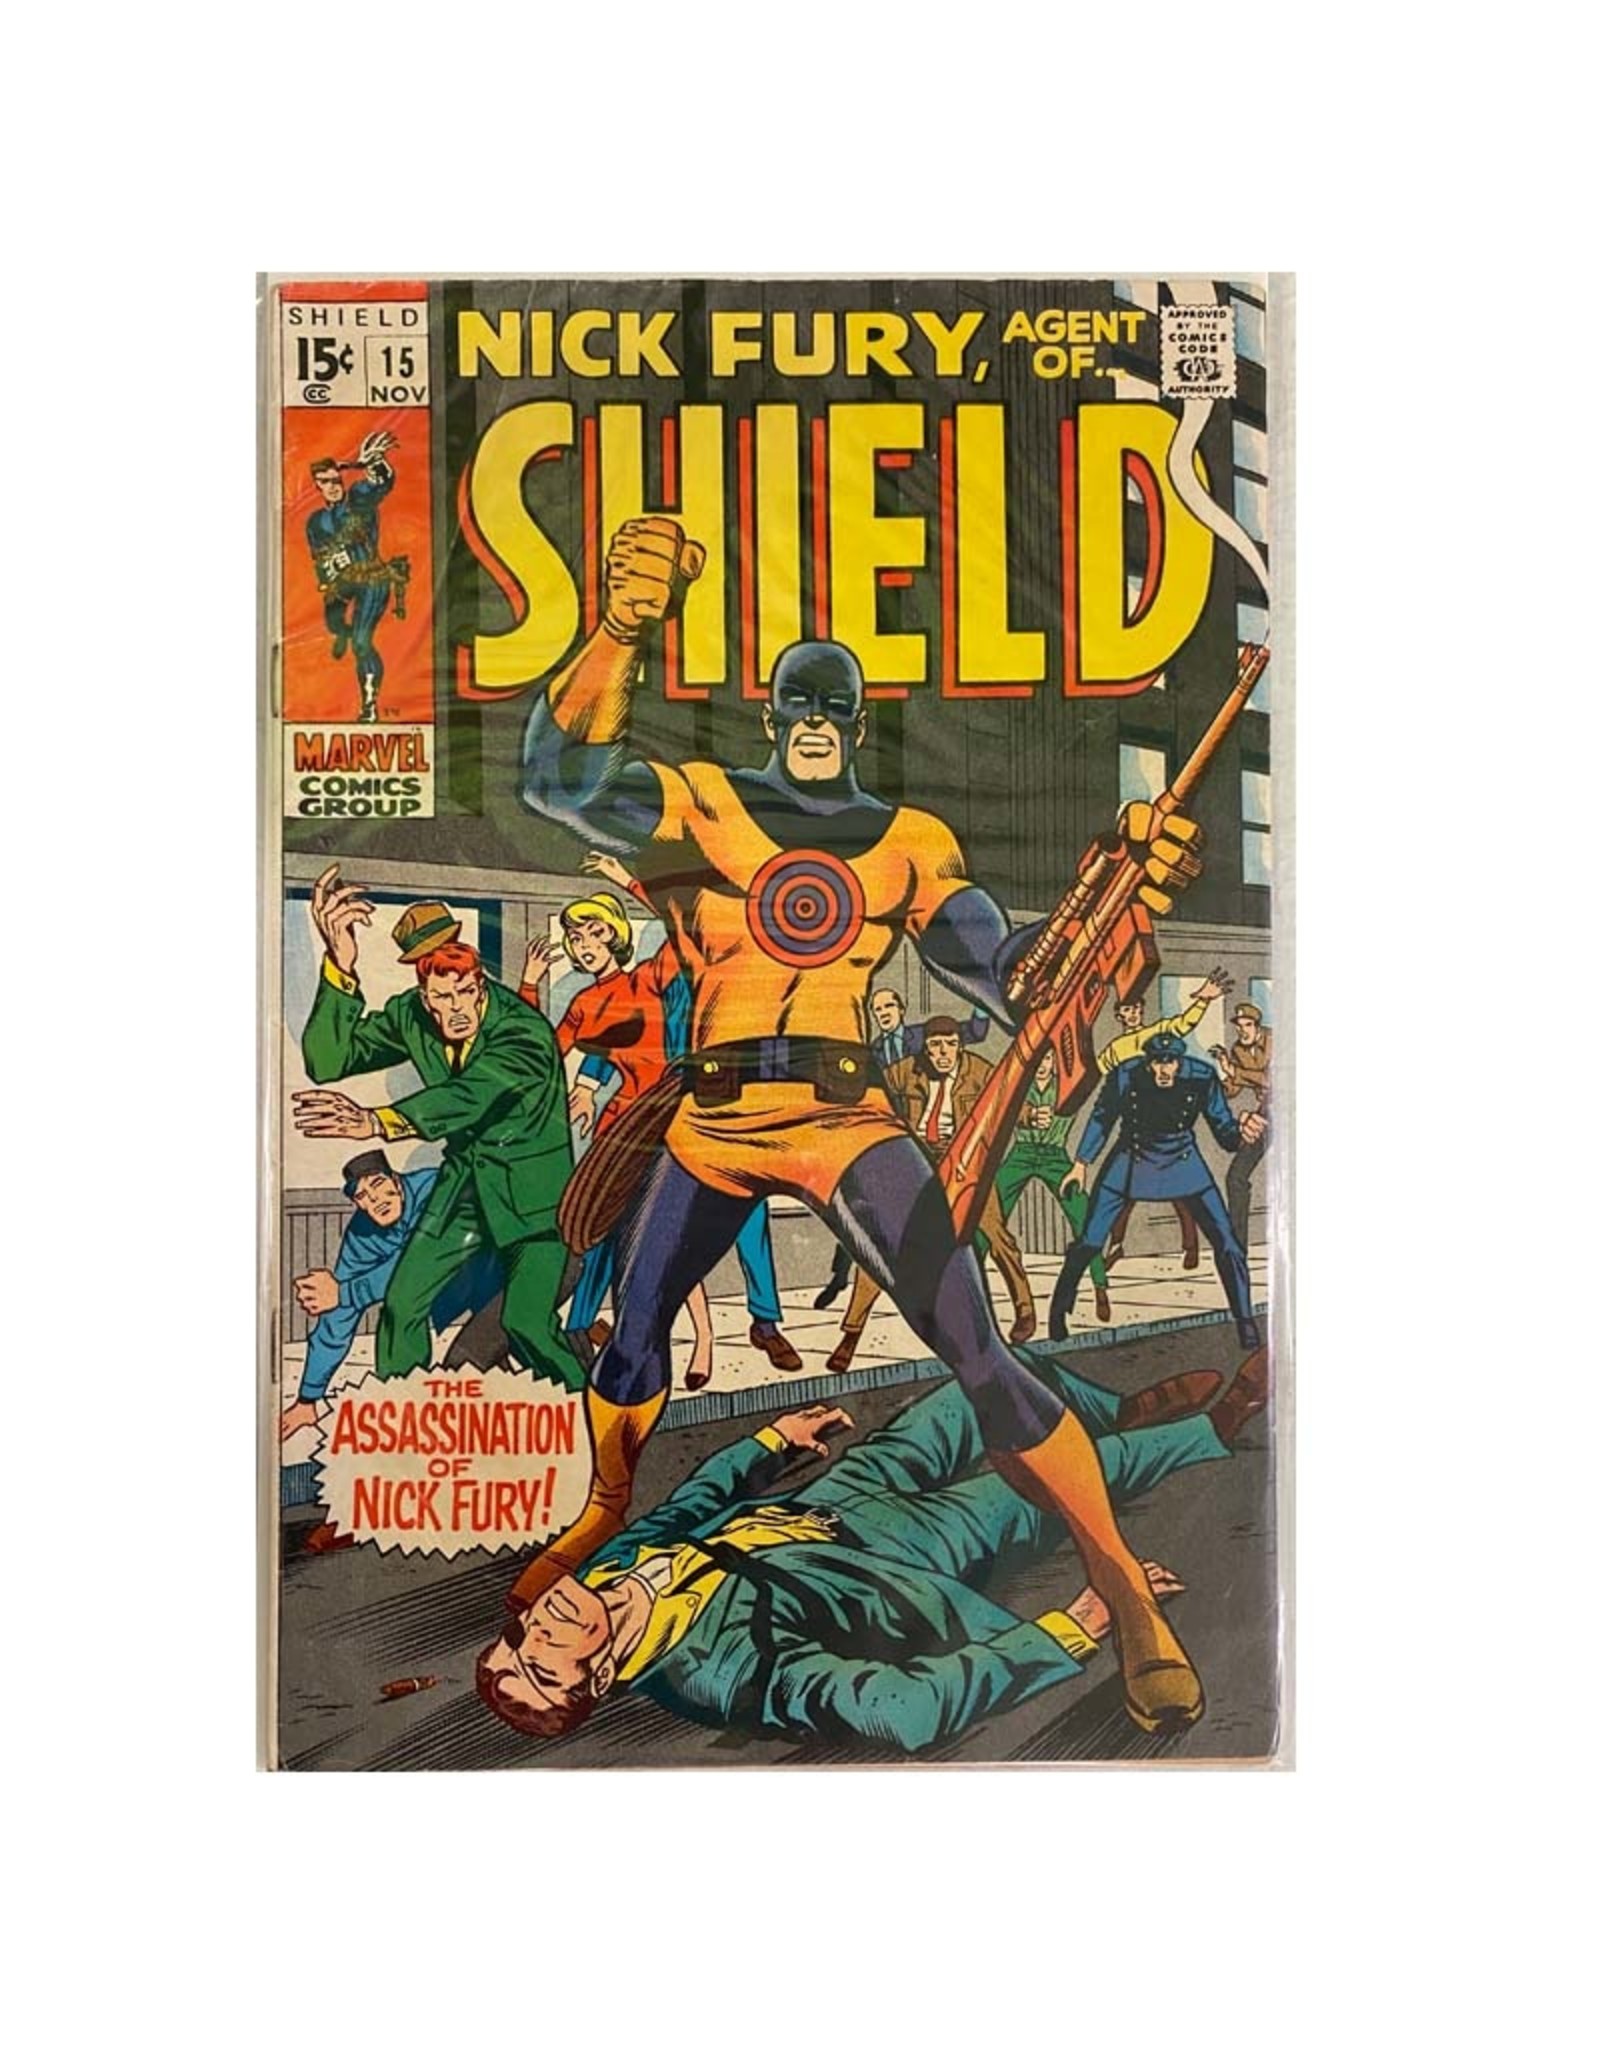 Marvel Comics Nick Fury, Agent of SHIELD #14 (.15 cover)